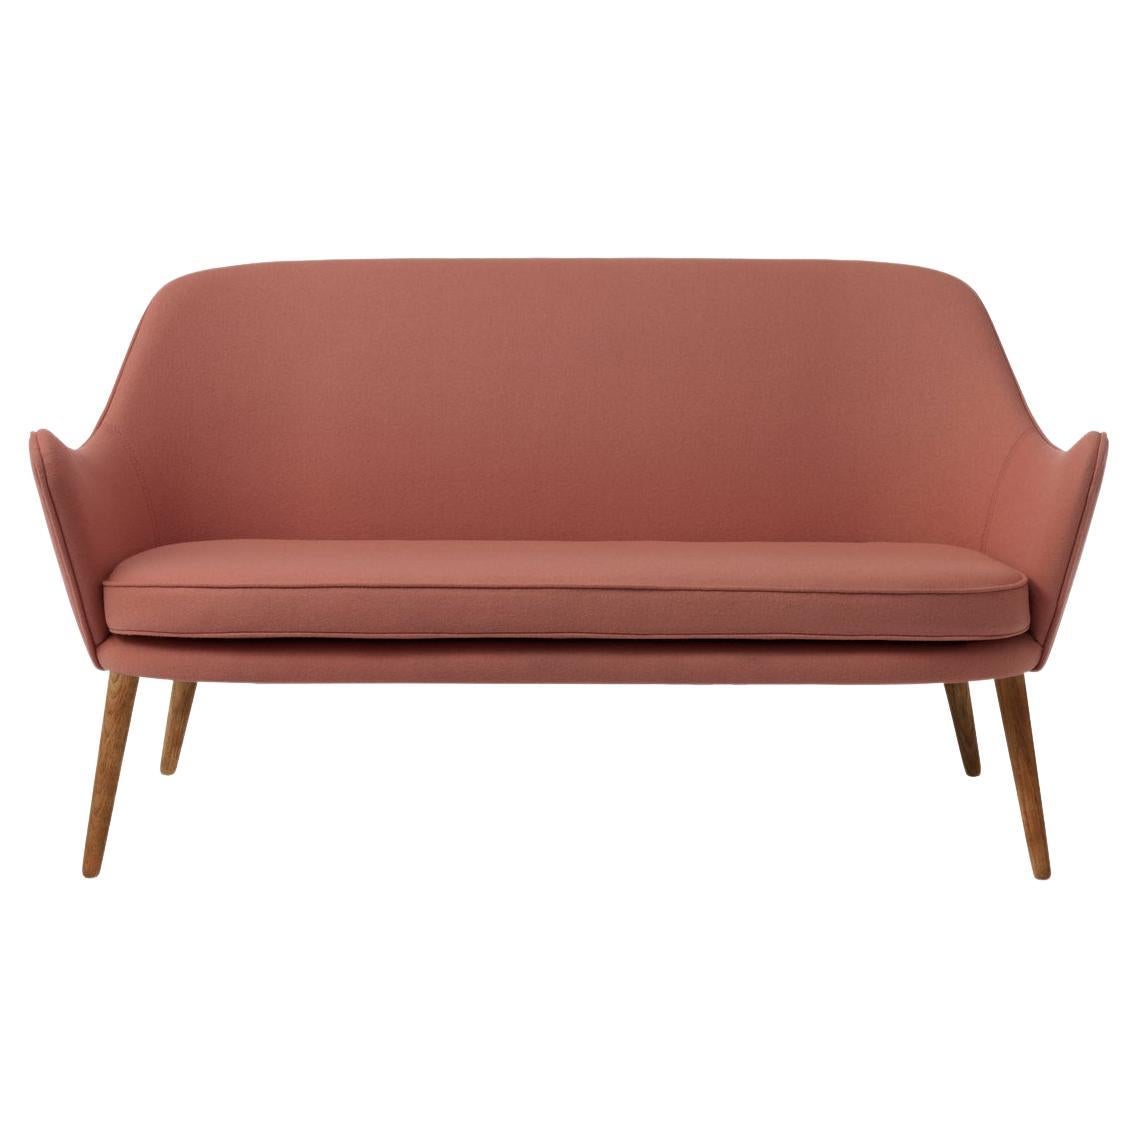 Dwell 2 Seater Blush by Warm Nordic For Sale